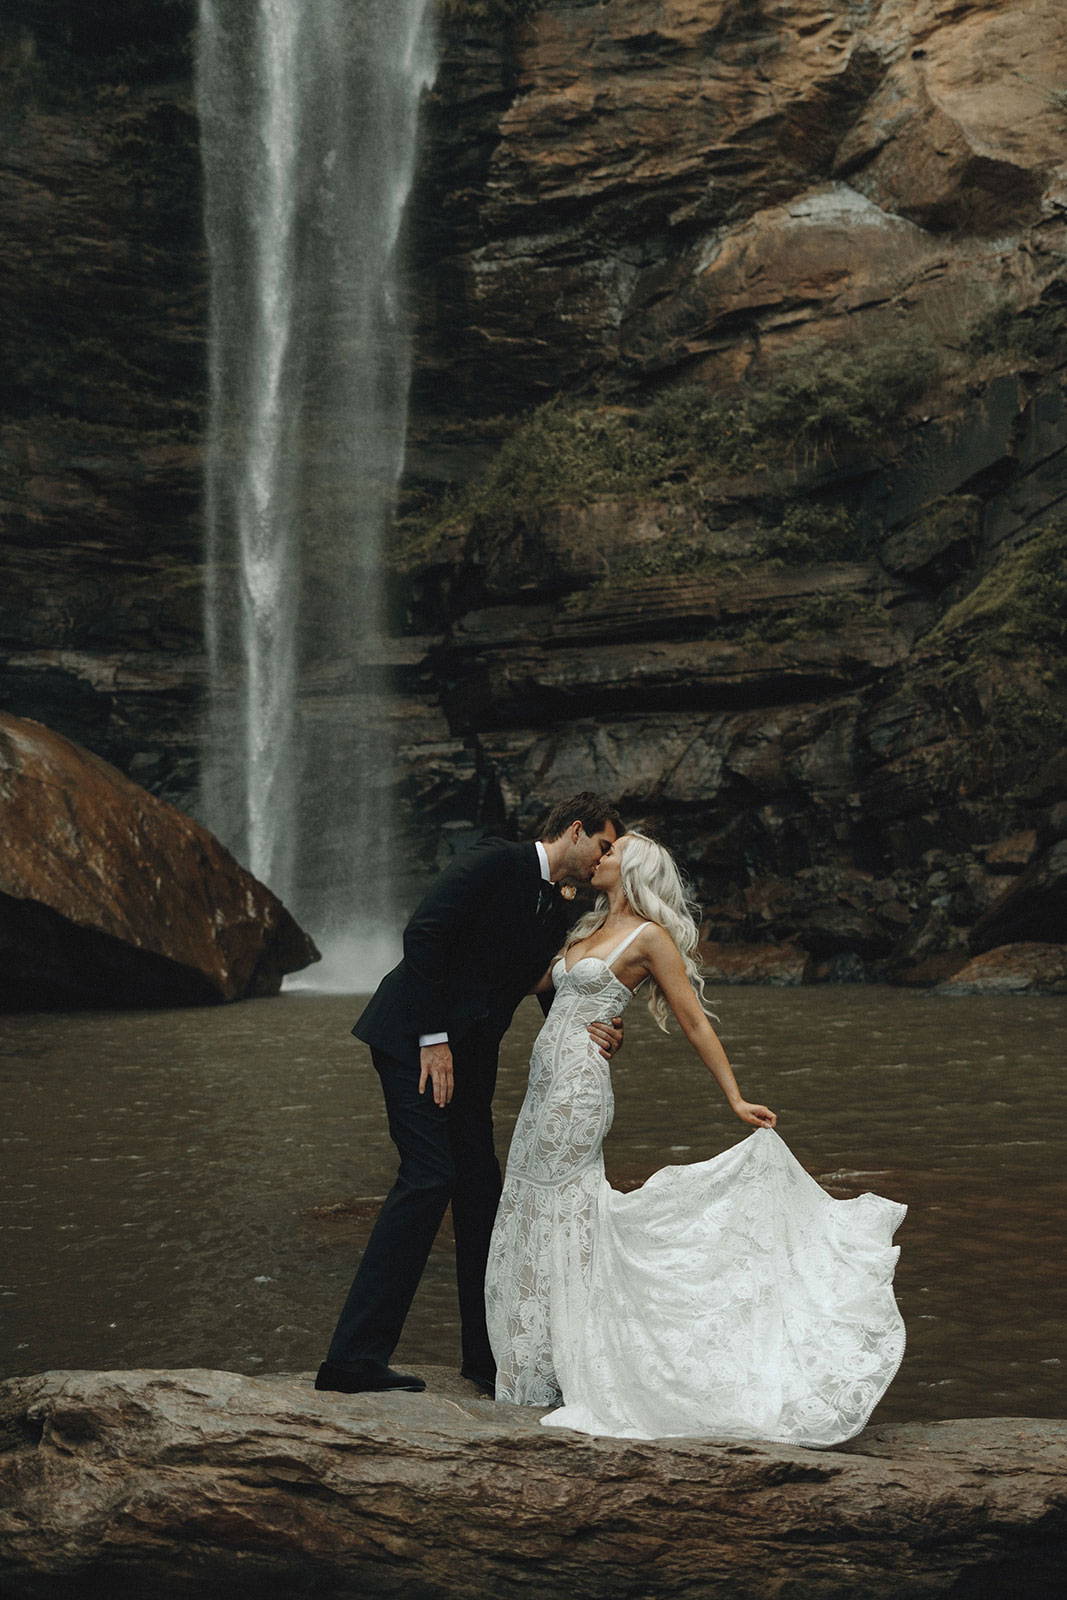 Bride and Groom sharing a kiss with waterfall background